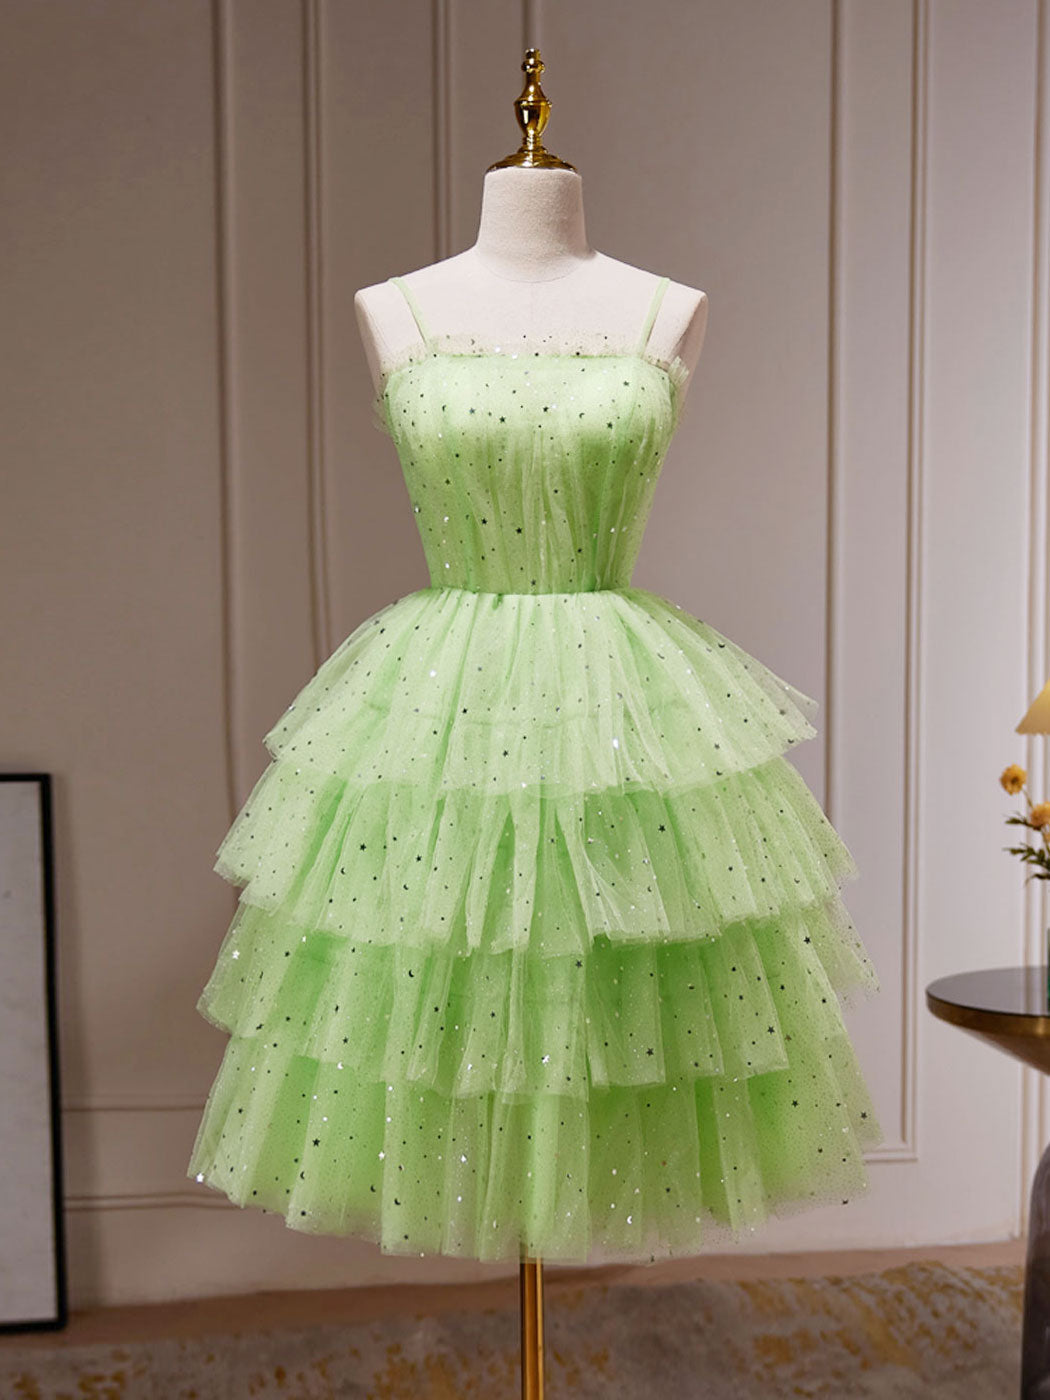 Green A-Line Tulle Short Corset Prom Dress, Green Corset Homecoming Dress outfit, Homecoming Dress Under 60